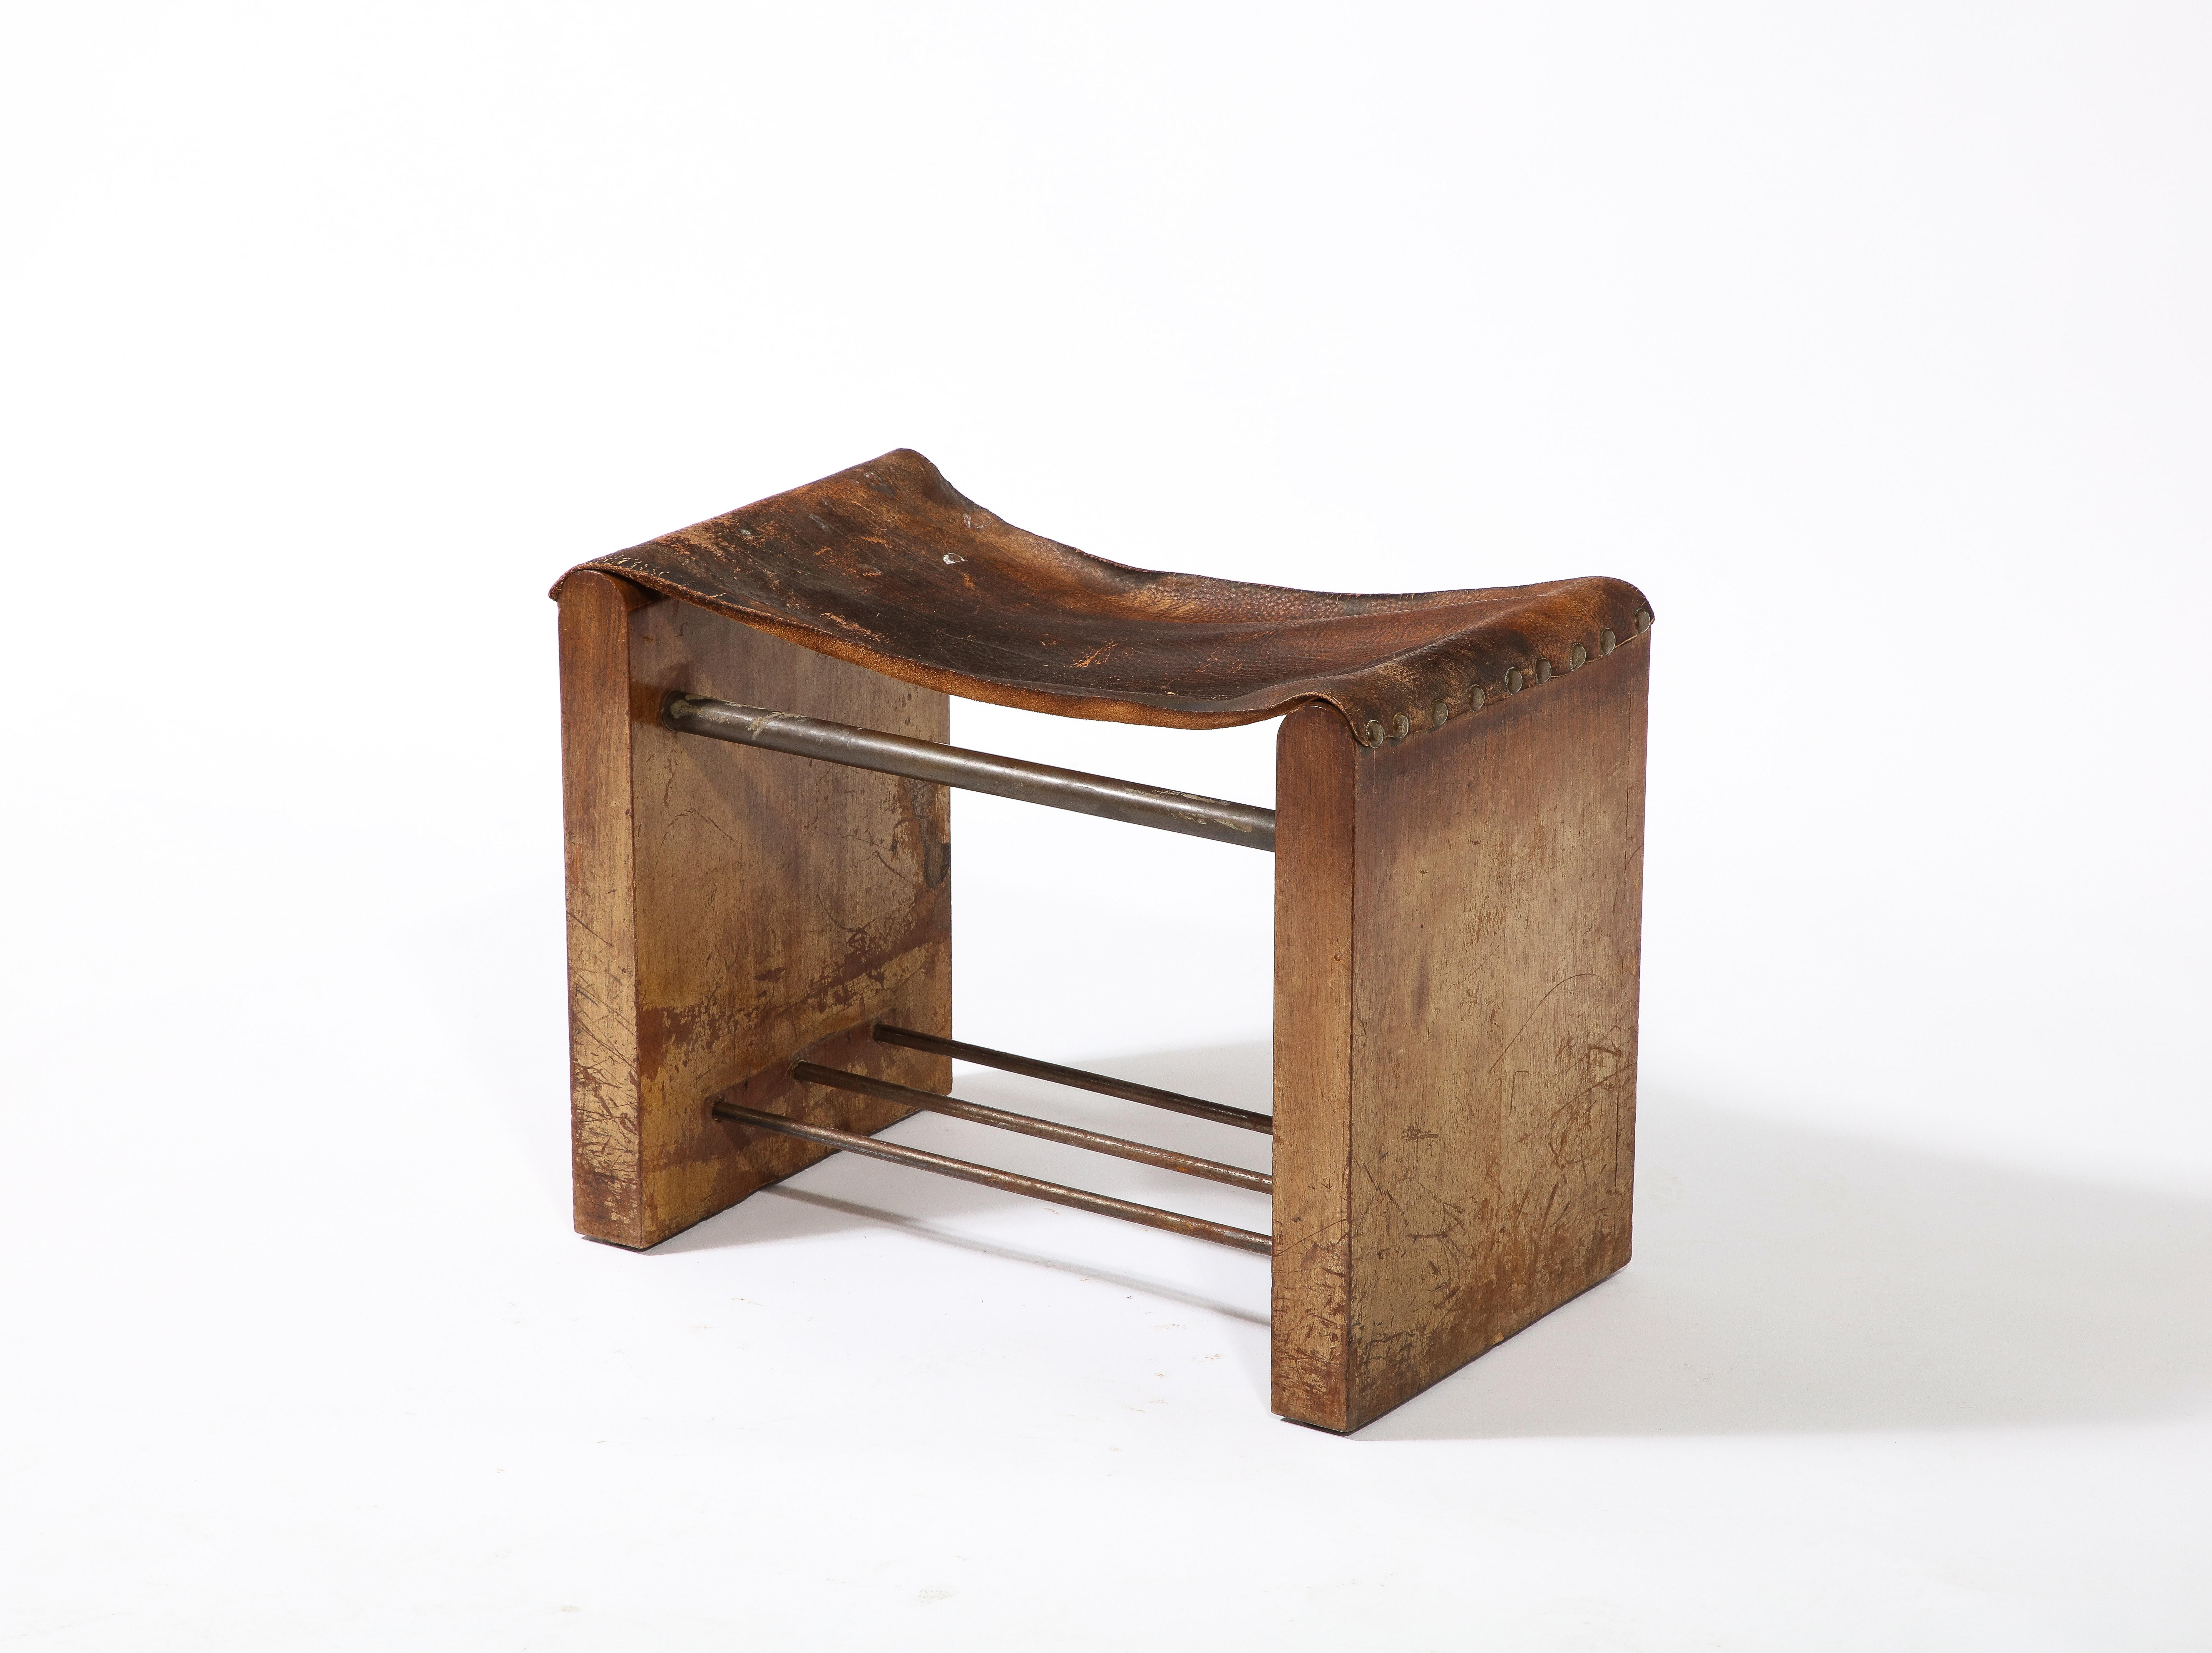 Mid-Century Modern Jacques Adnet Style Small Bench Stool in Oak, Leather & Metal, France 1950's